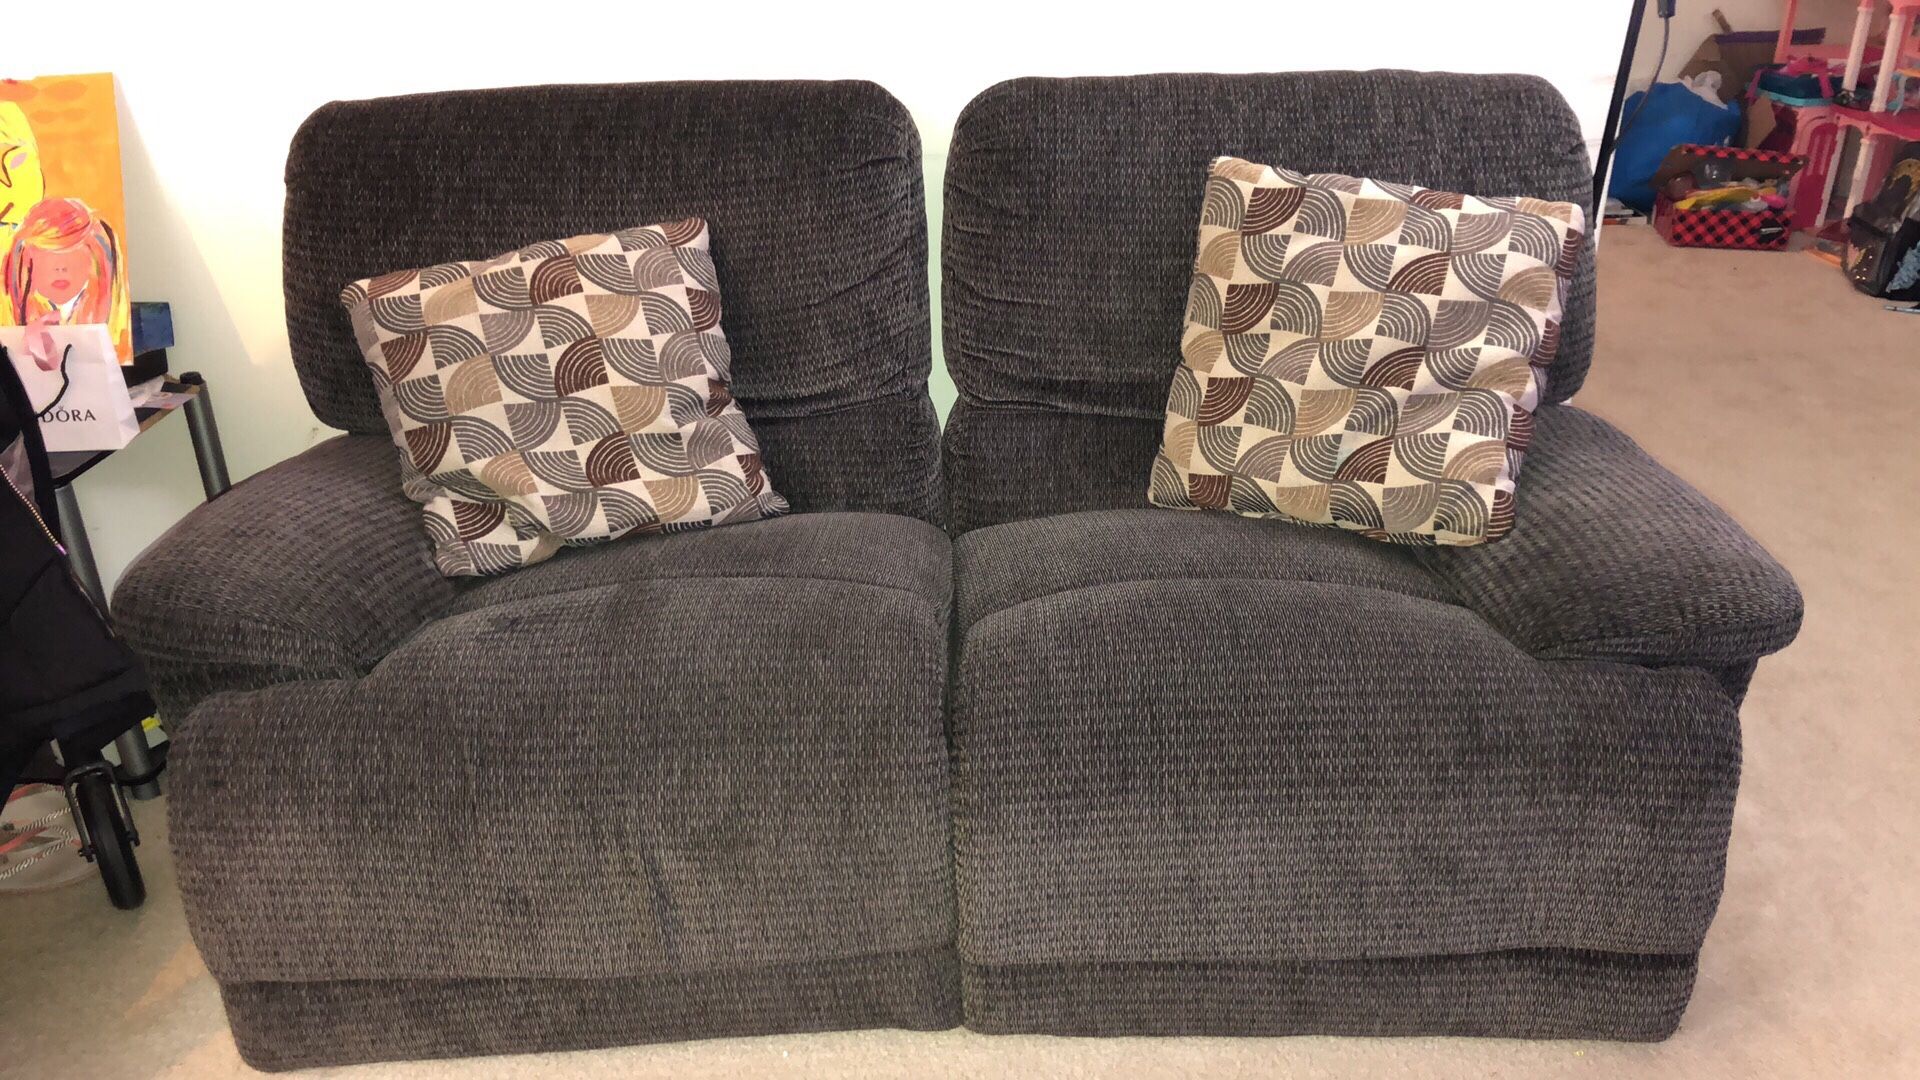 Gently used fabric automatic reclining couches. Sold together or separate.